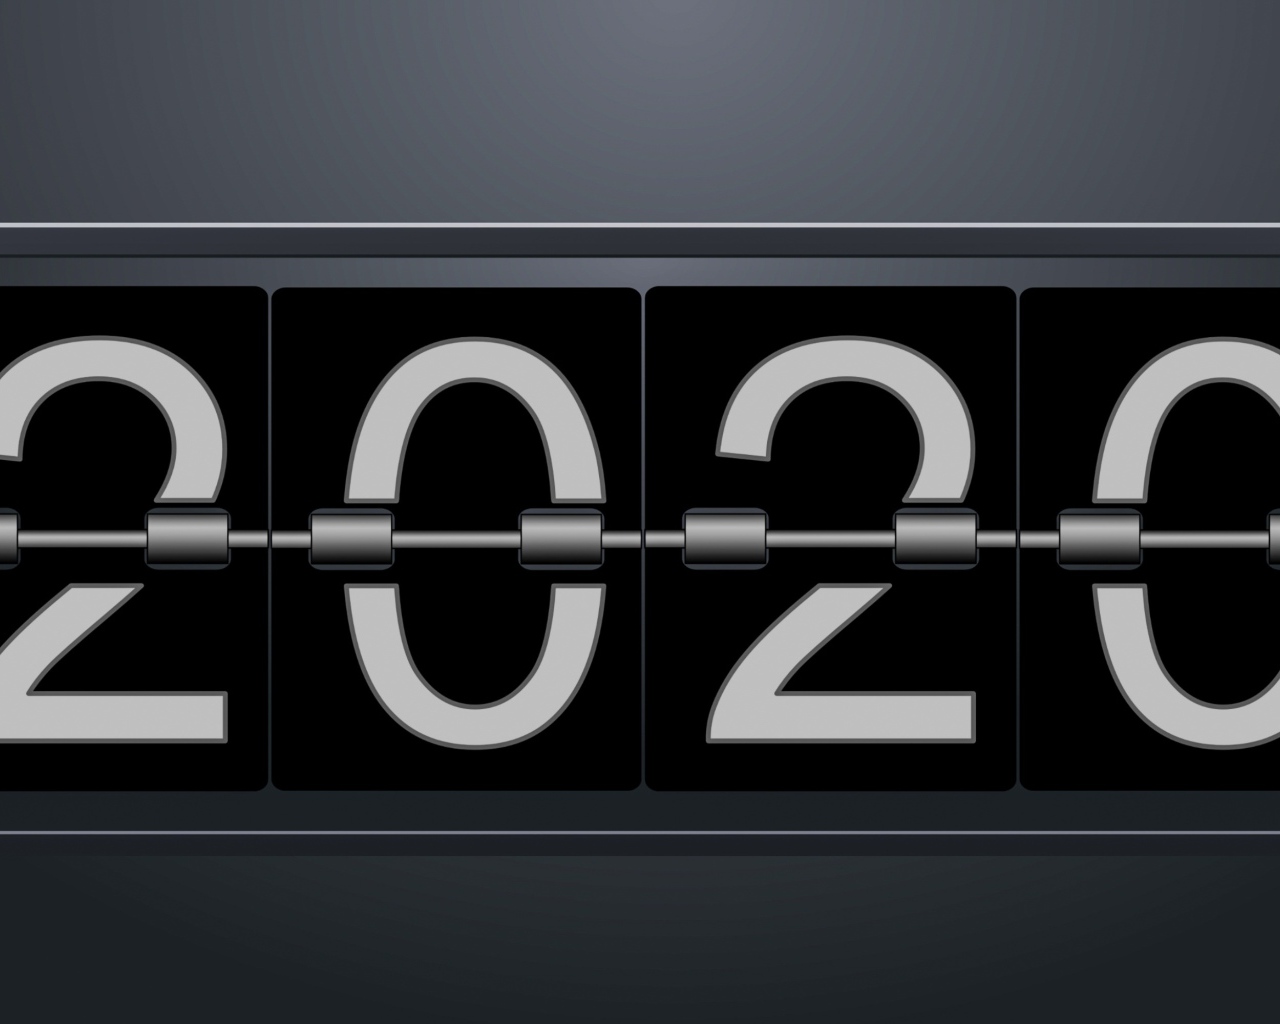 Flip numbers 2020 on a gray background